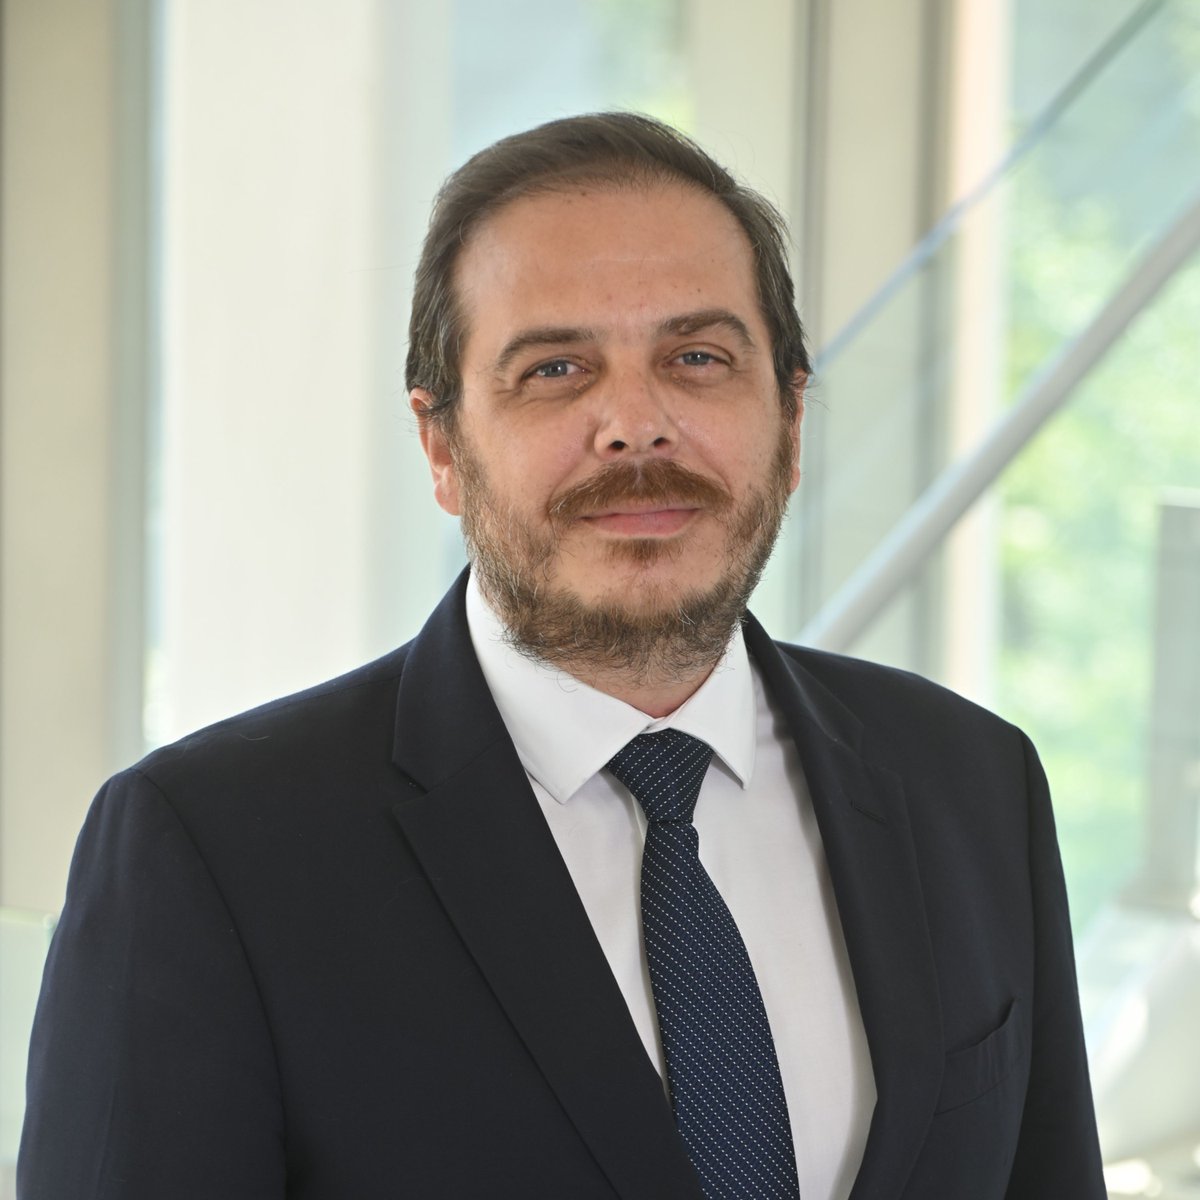 Congratulations to PIJIP Senior Research Analyst Andres Izquierdo who was recently named Co-Chair of the Sub-Committee on AI and Copyright at the @AIPLA. @AUWCL ow.ly/yqPM50R5RvC